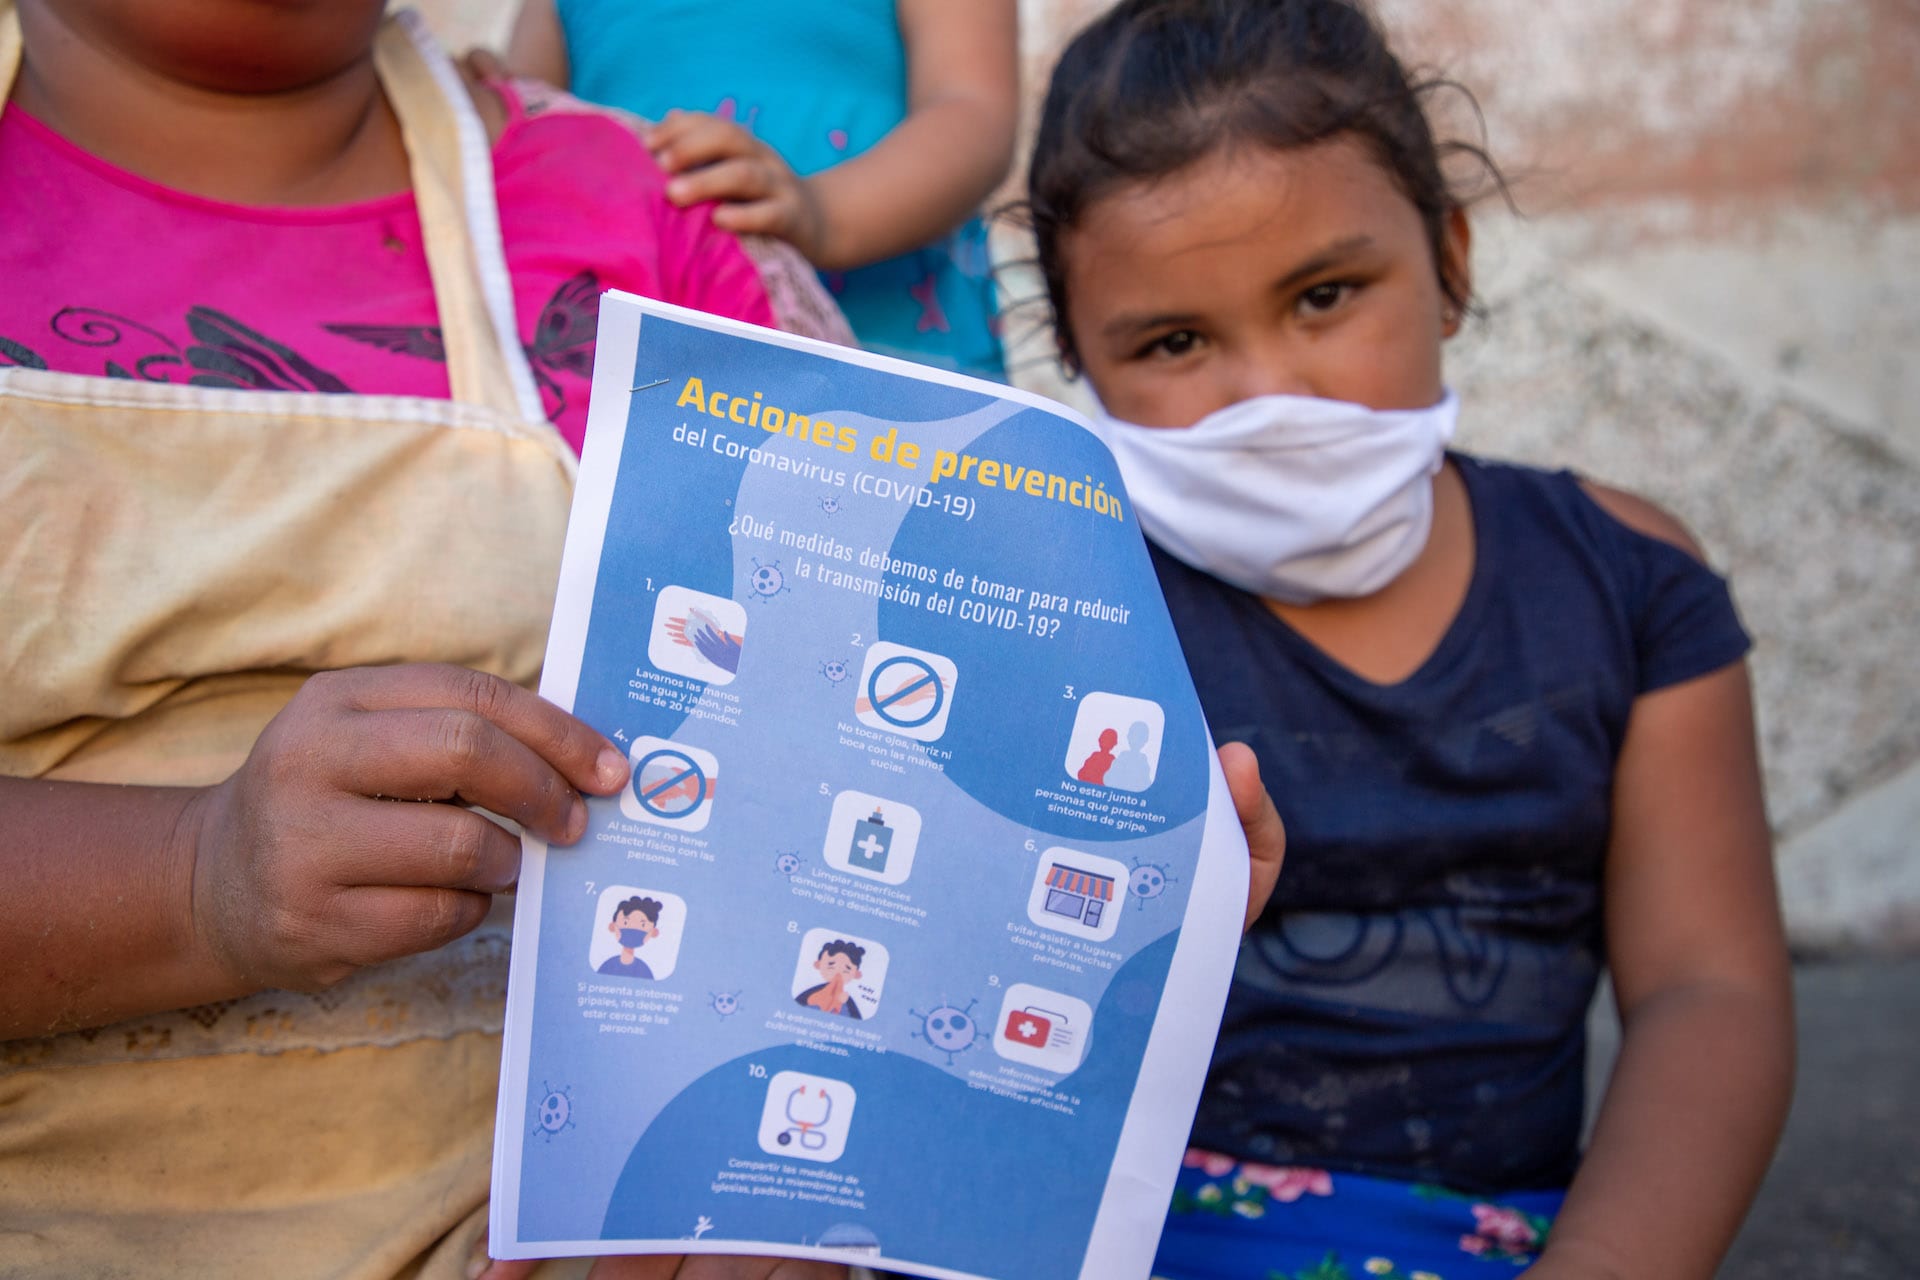 A girl wearing a mask sits next to her mother who is holding a pamphlet about COVID-19 prevention.